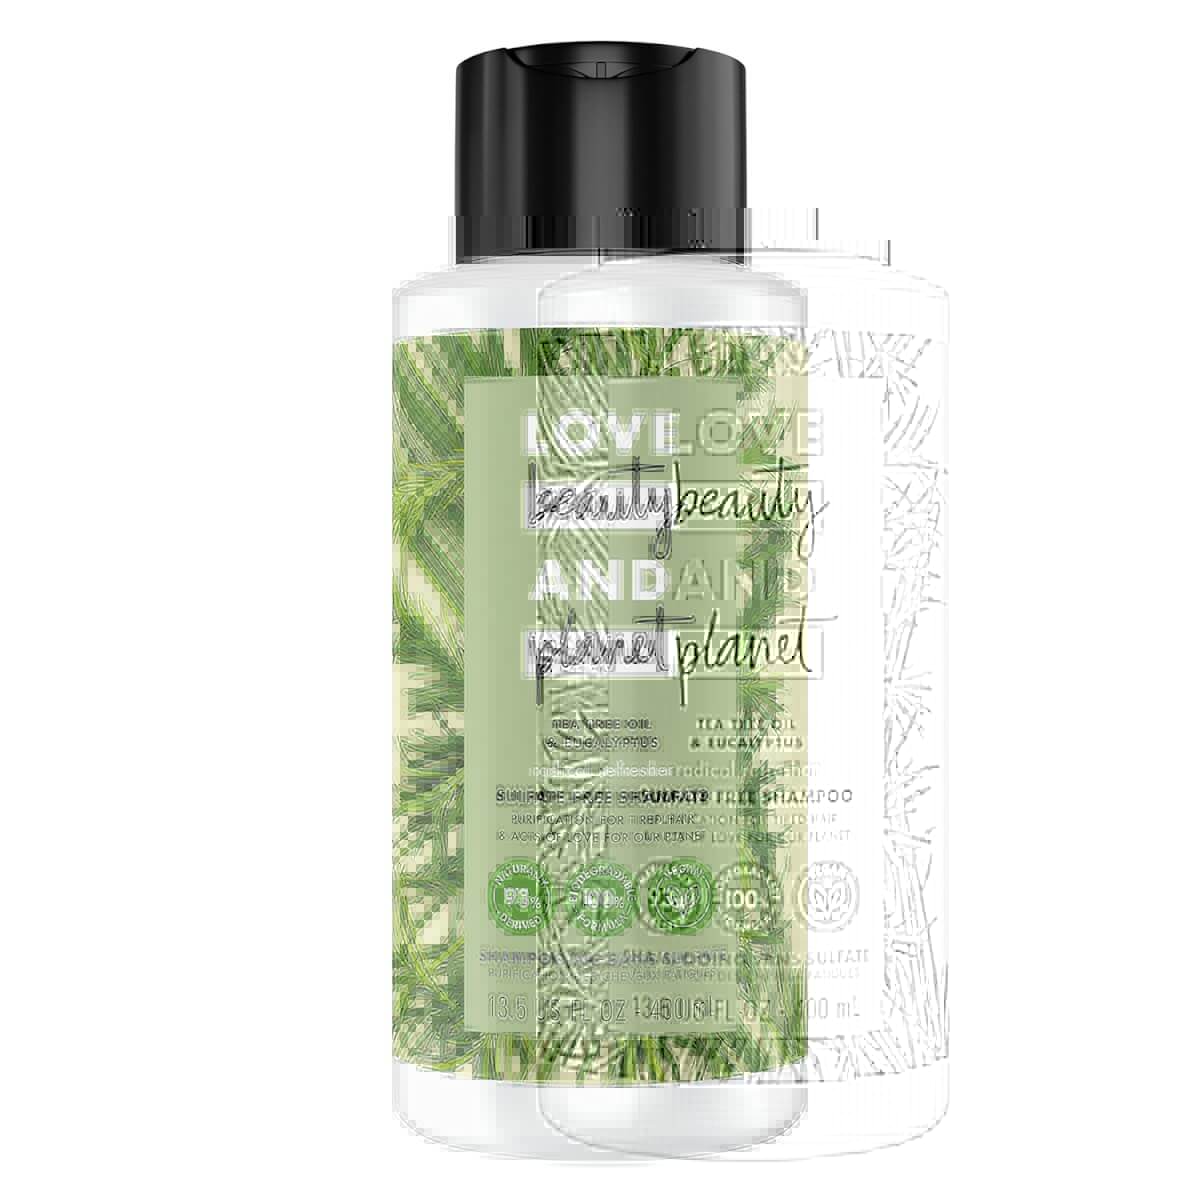 Love Beauty and Planet Tea Tree Oil Radical Refresher